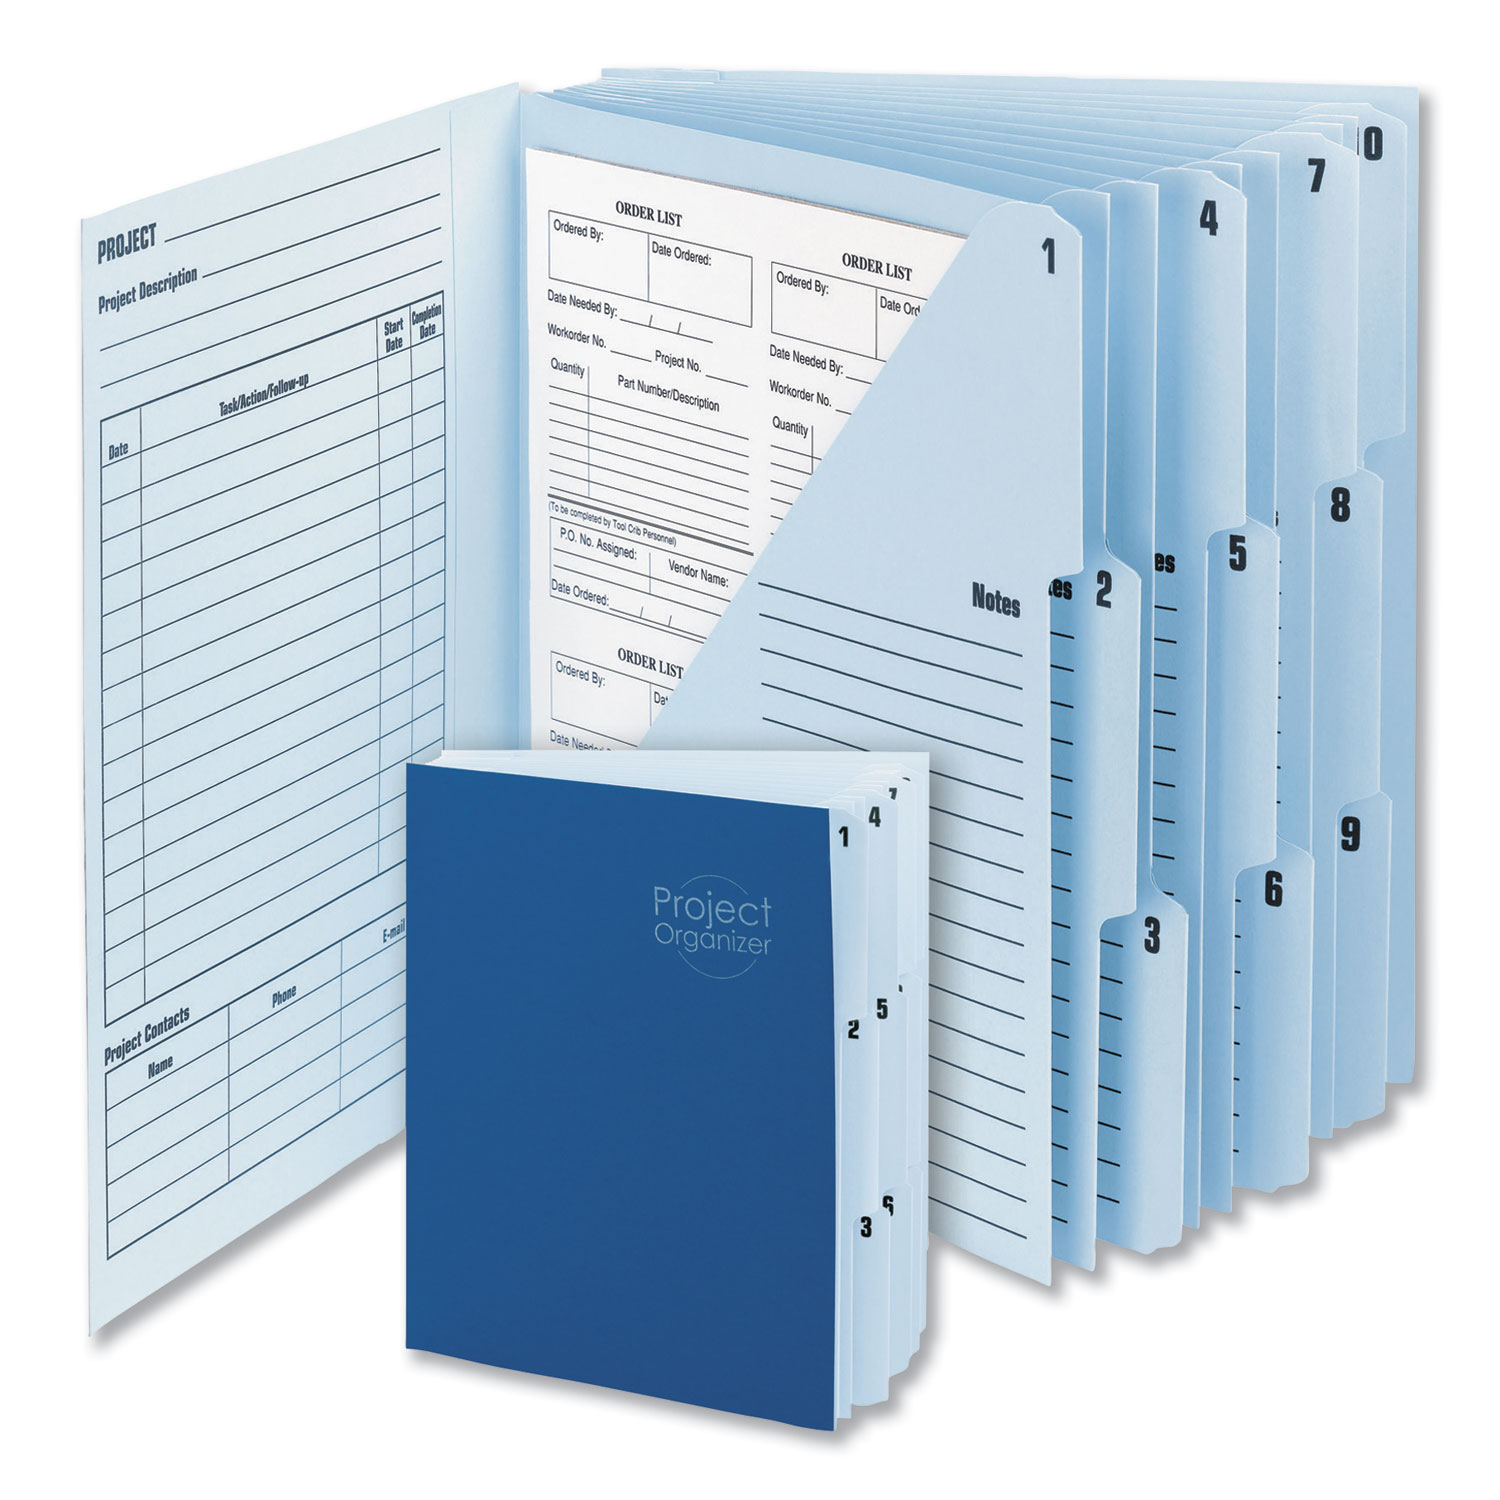  Smead 89200 10-Pocket Project Organizer, 10 Sections, 1/3-Cut Tab, Letter Size, Lake Blue/Navy Blue (SMD89200) 